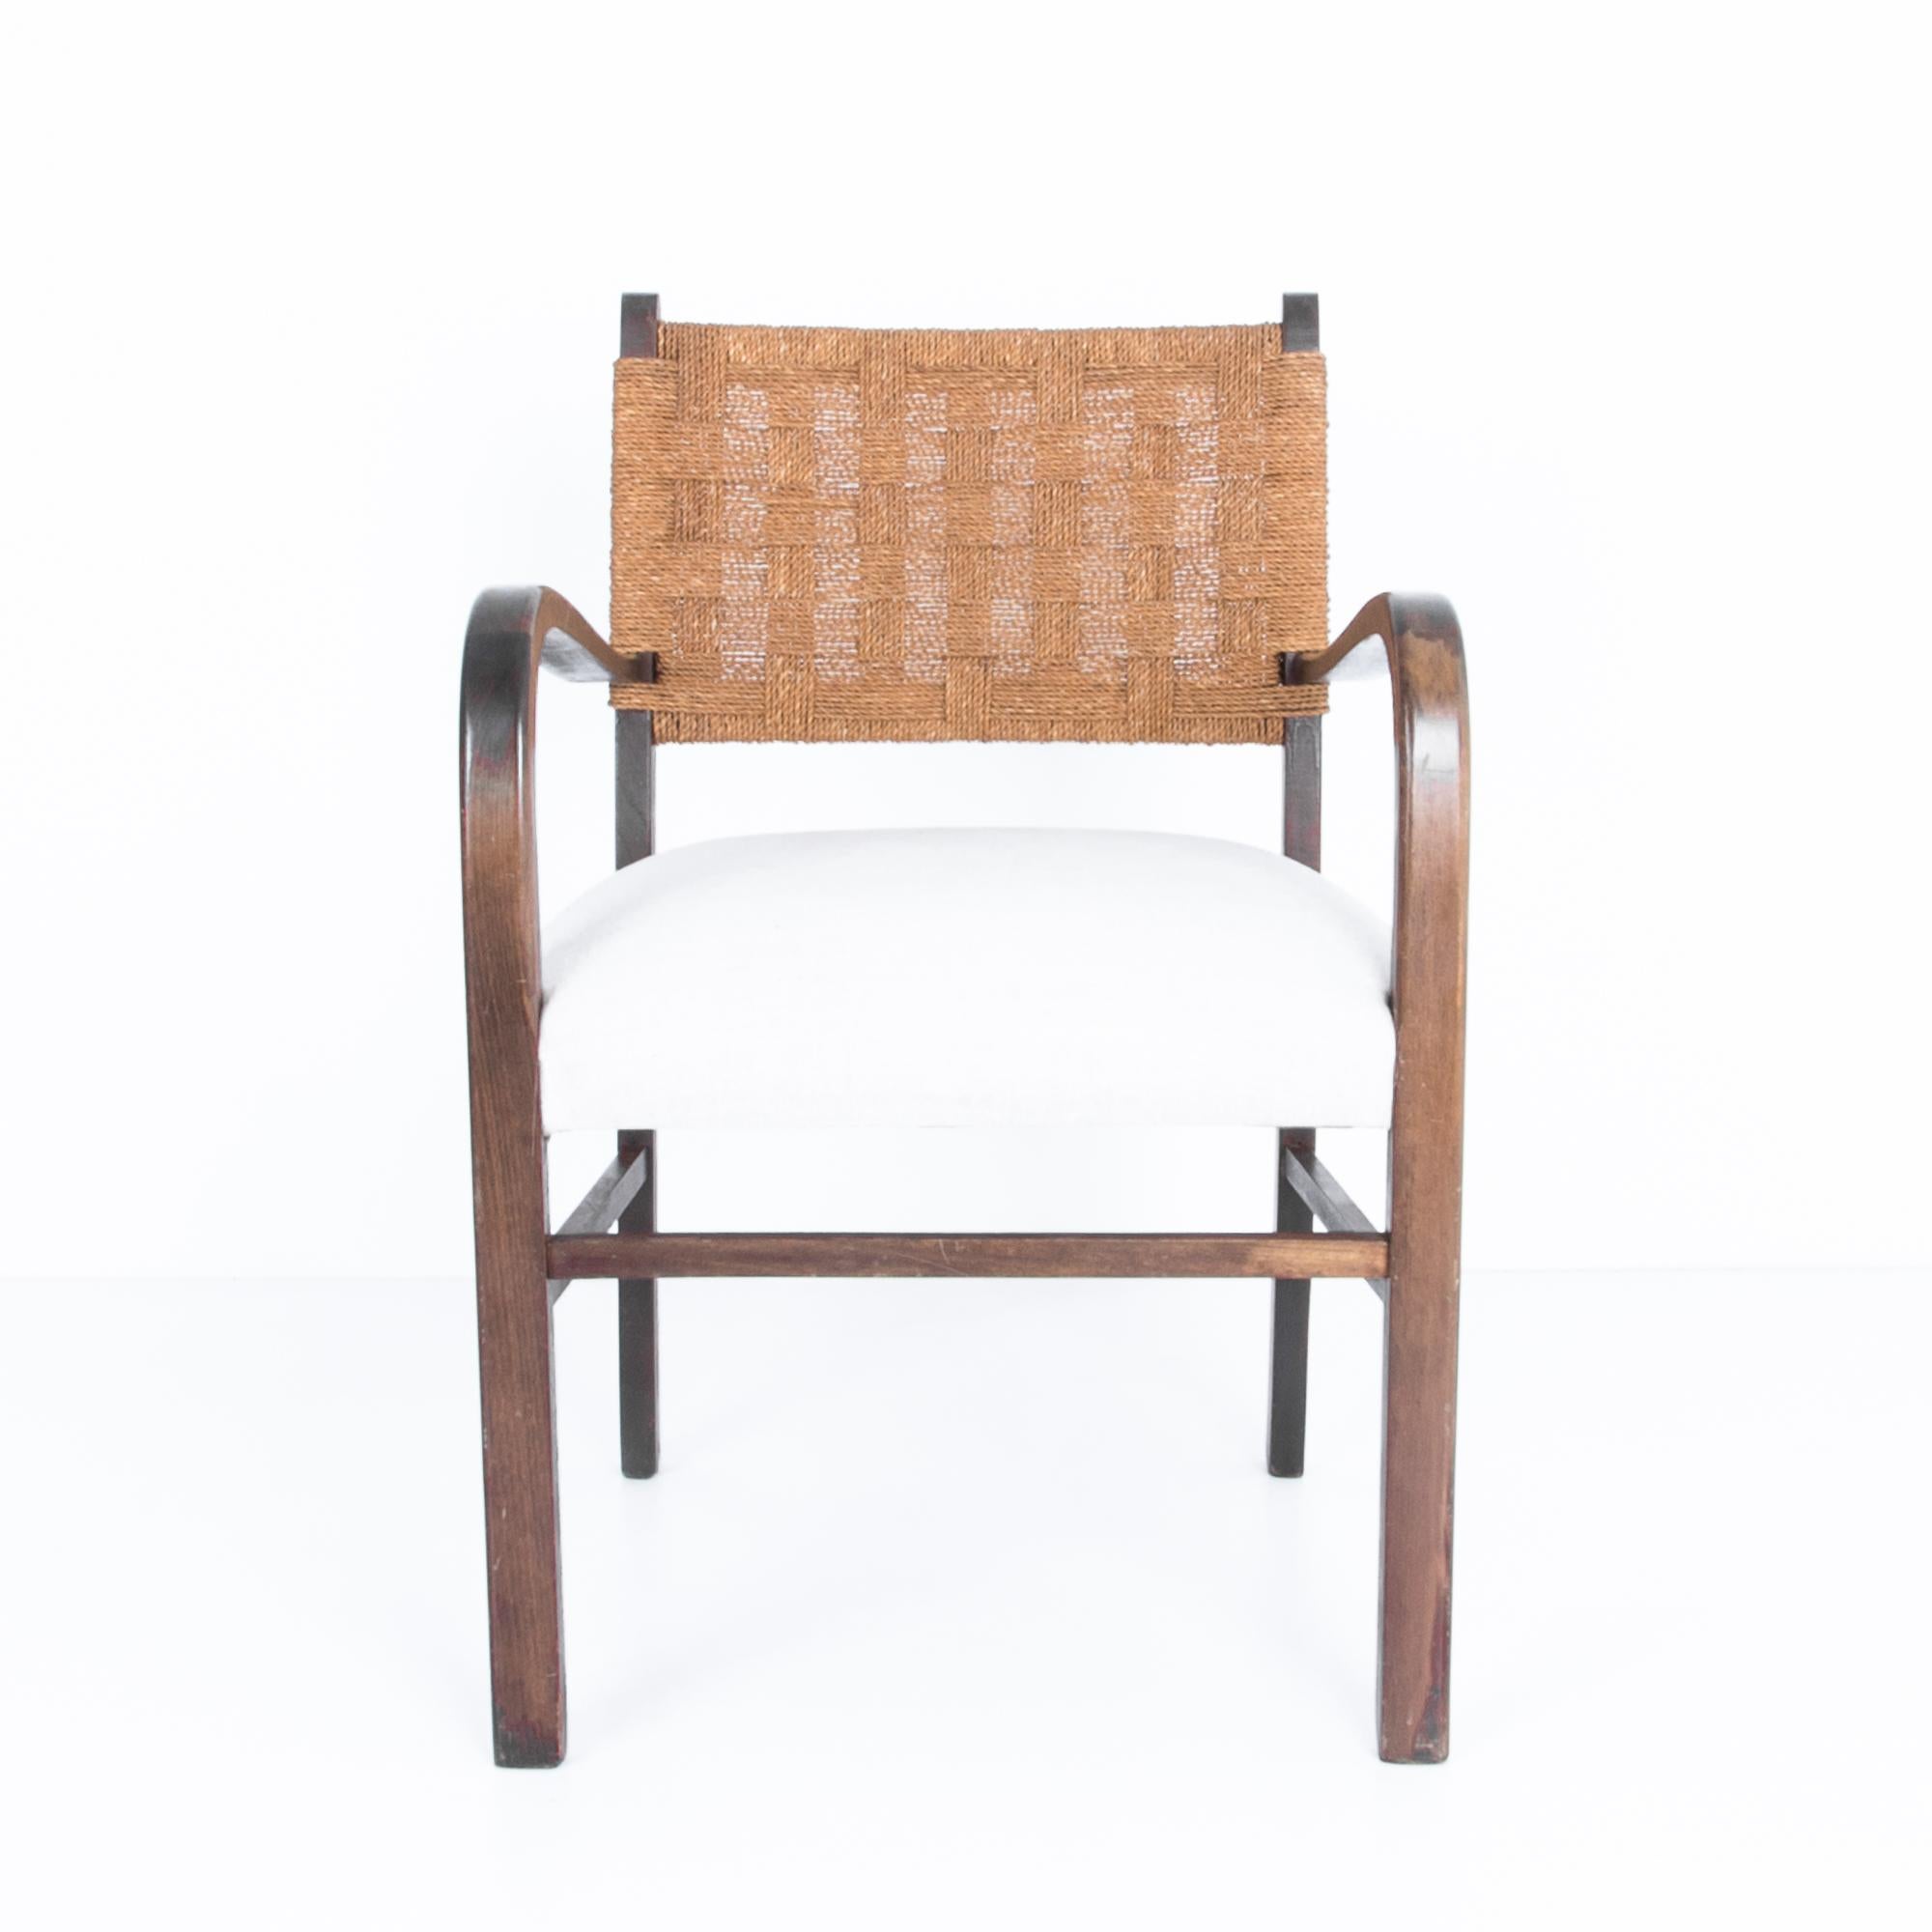 A Classic Mid-Century Modern design from France, circa 1940. A simple and elegant geometry contrasts the soft and comfortable seat with geometric bentwood element and woven cord back. The use of natural materials and neutral colours is a subtle nod